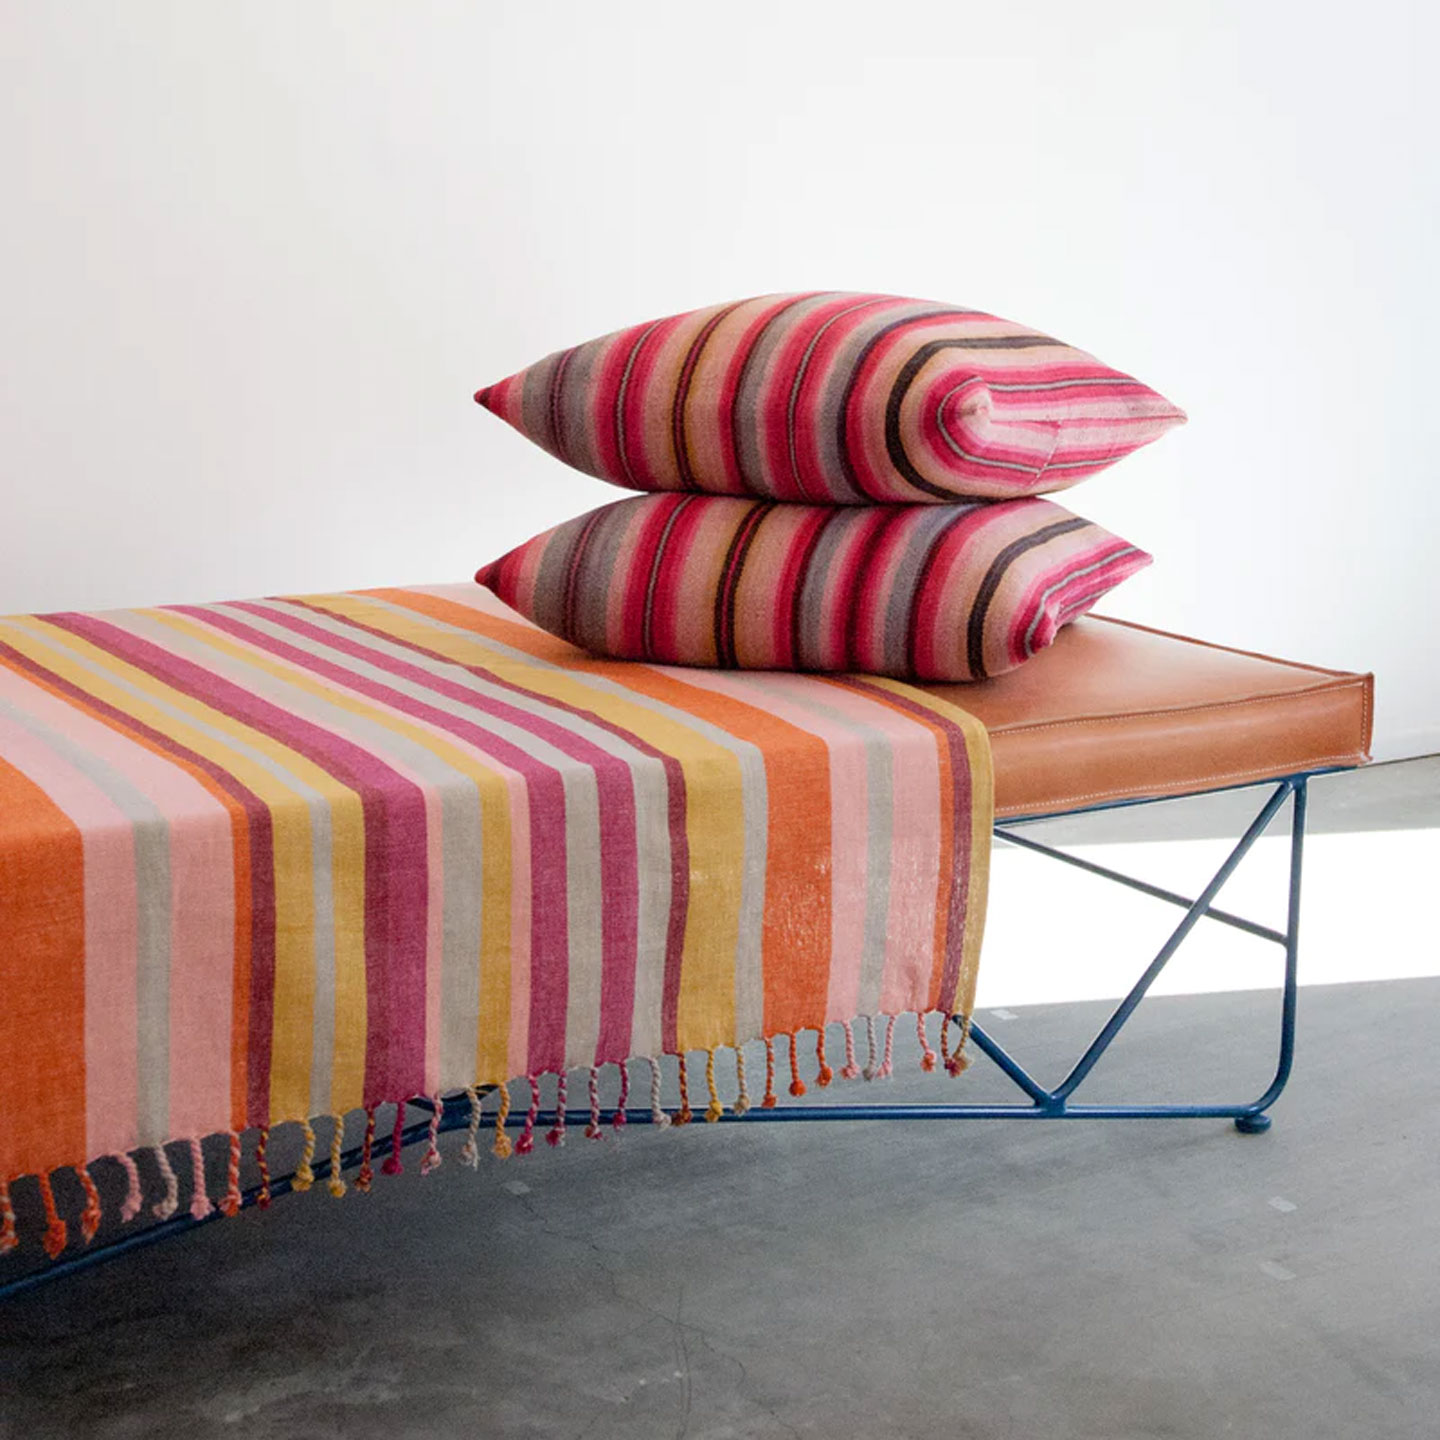 colorful boho striped pillows and blankets from Garza Marfa